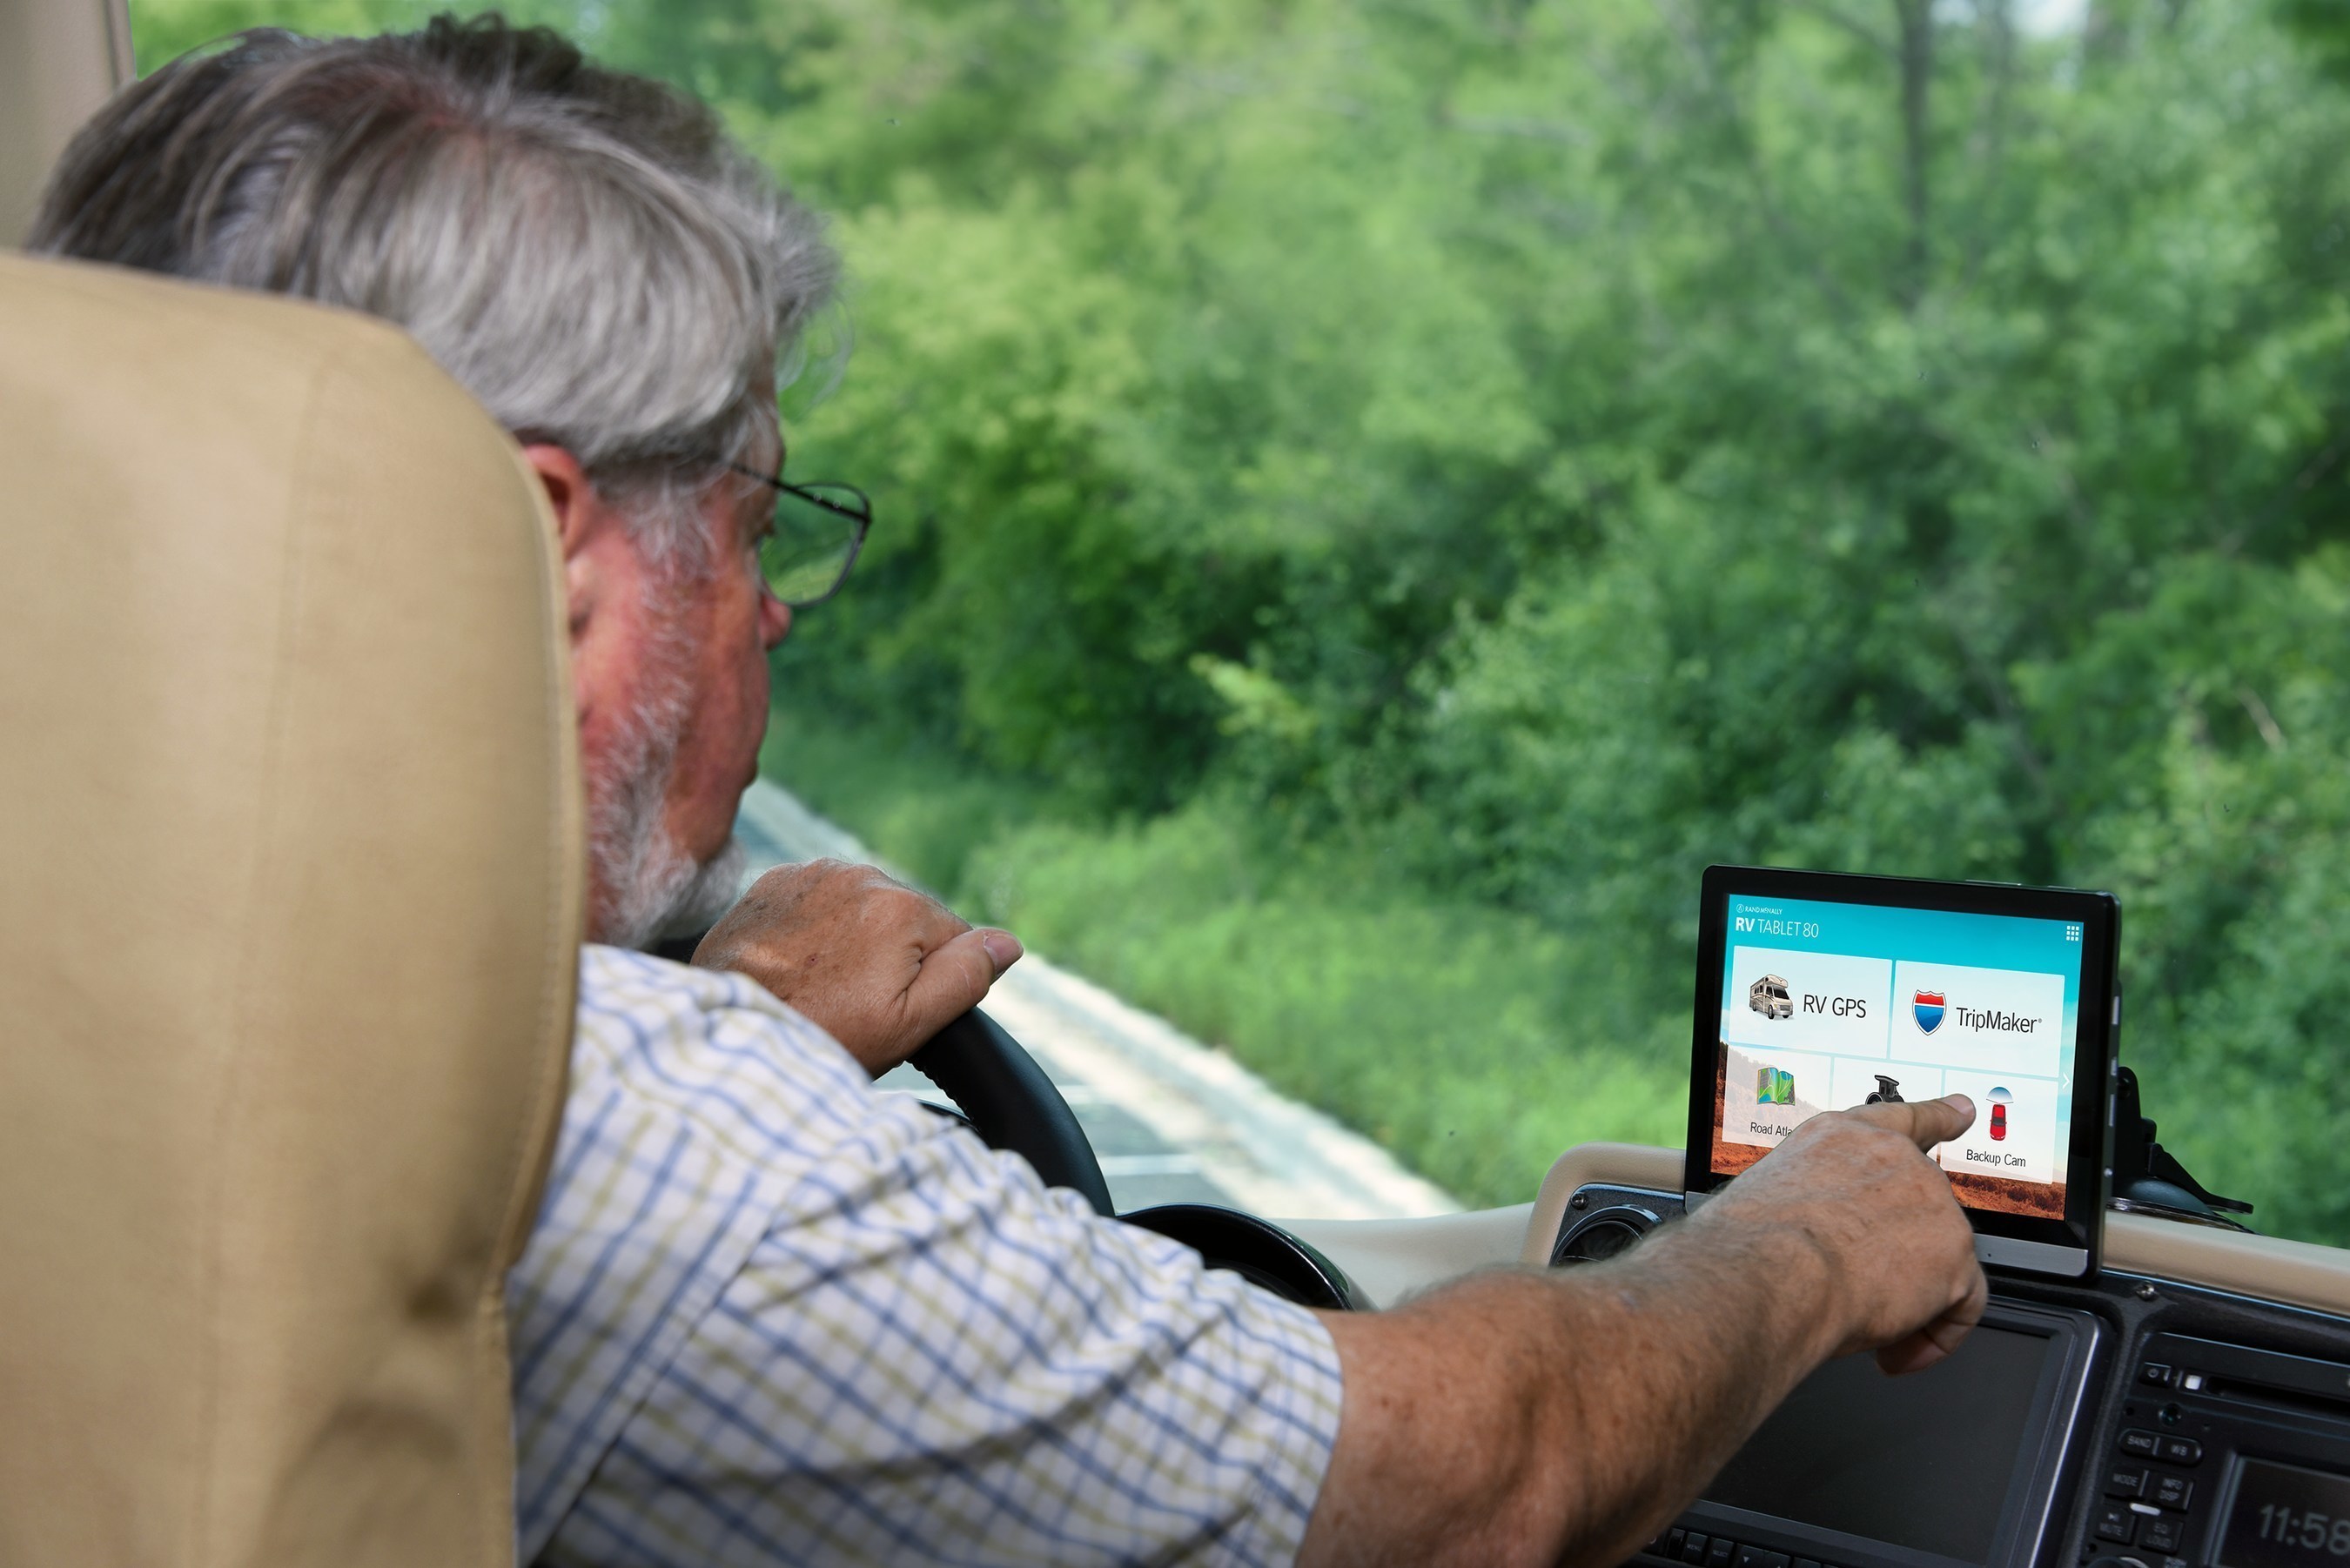 Designed for on the road and off, the RV Tablet 80 comes preloaded with a suite of unique travel apps from Rand McNally, and Wi-Fi connectivity, which provides access to the Android marketplace to check email, download entertainment, and catch up on social media when stopping along the way.